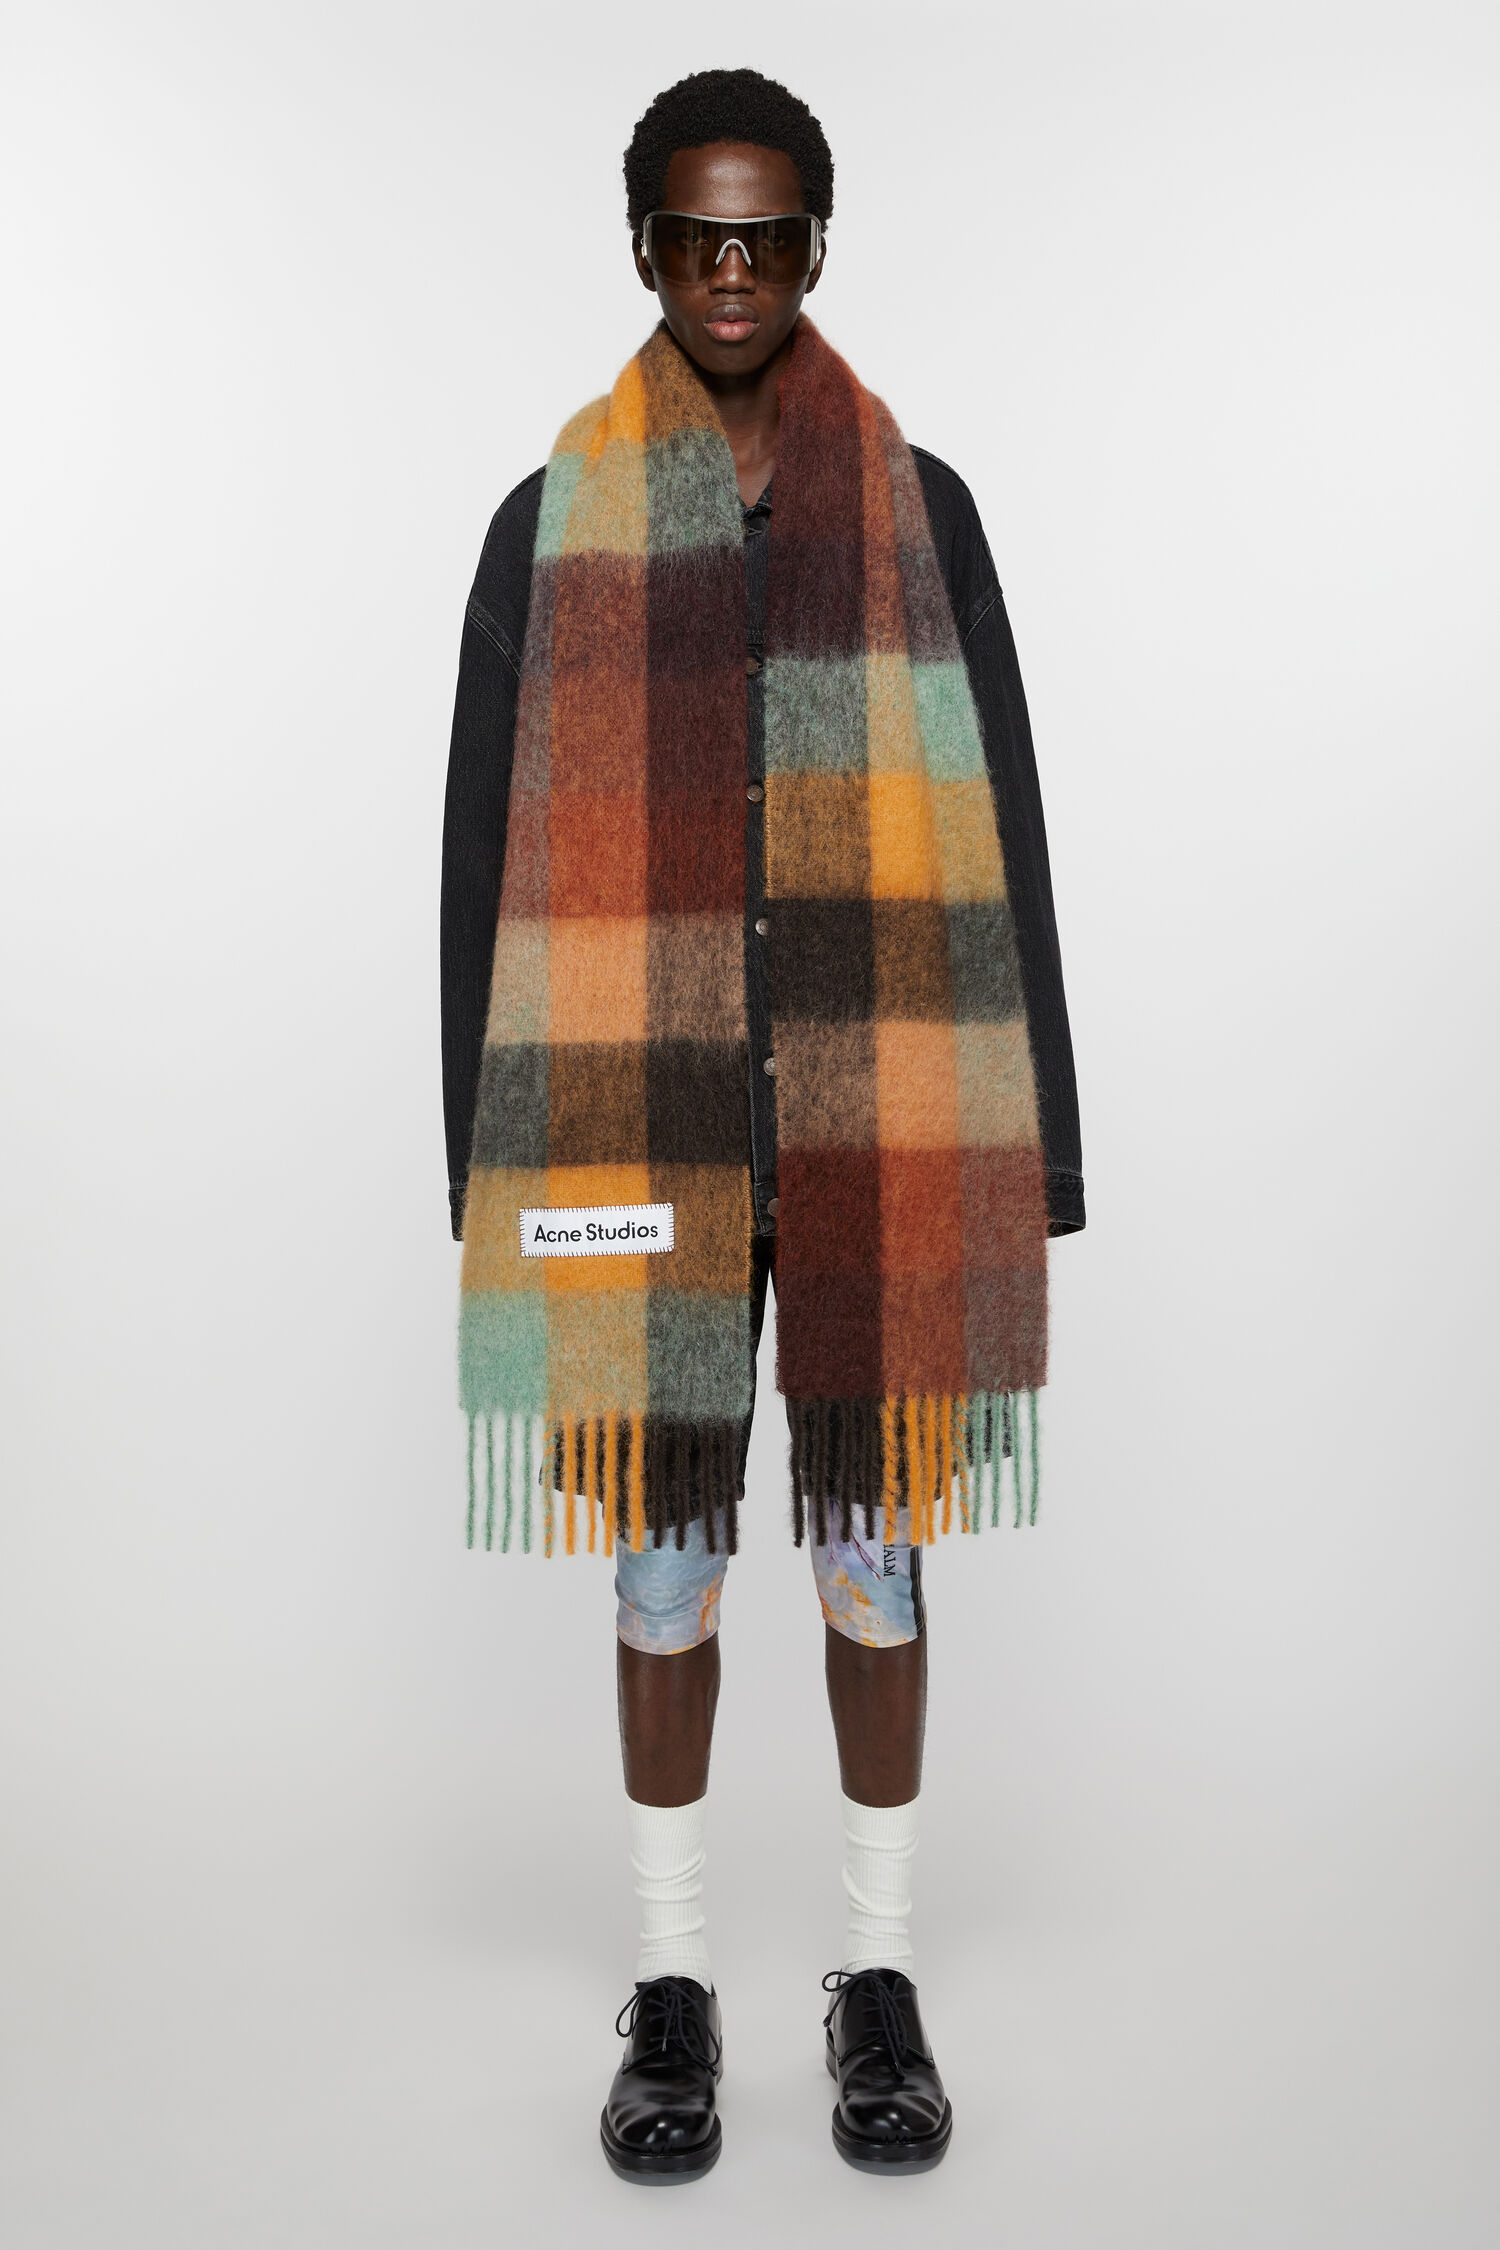 Acne Studios - Mohair checked scarf - Chestnut brown/yellow/green